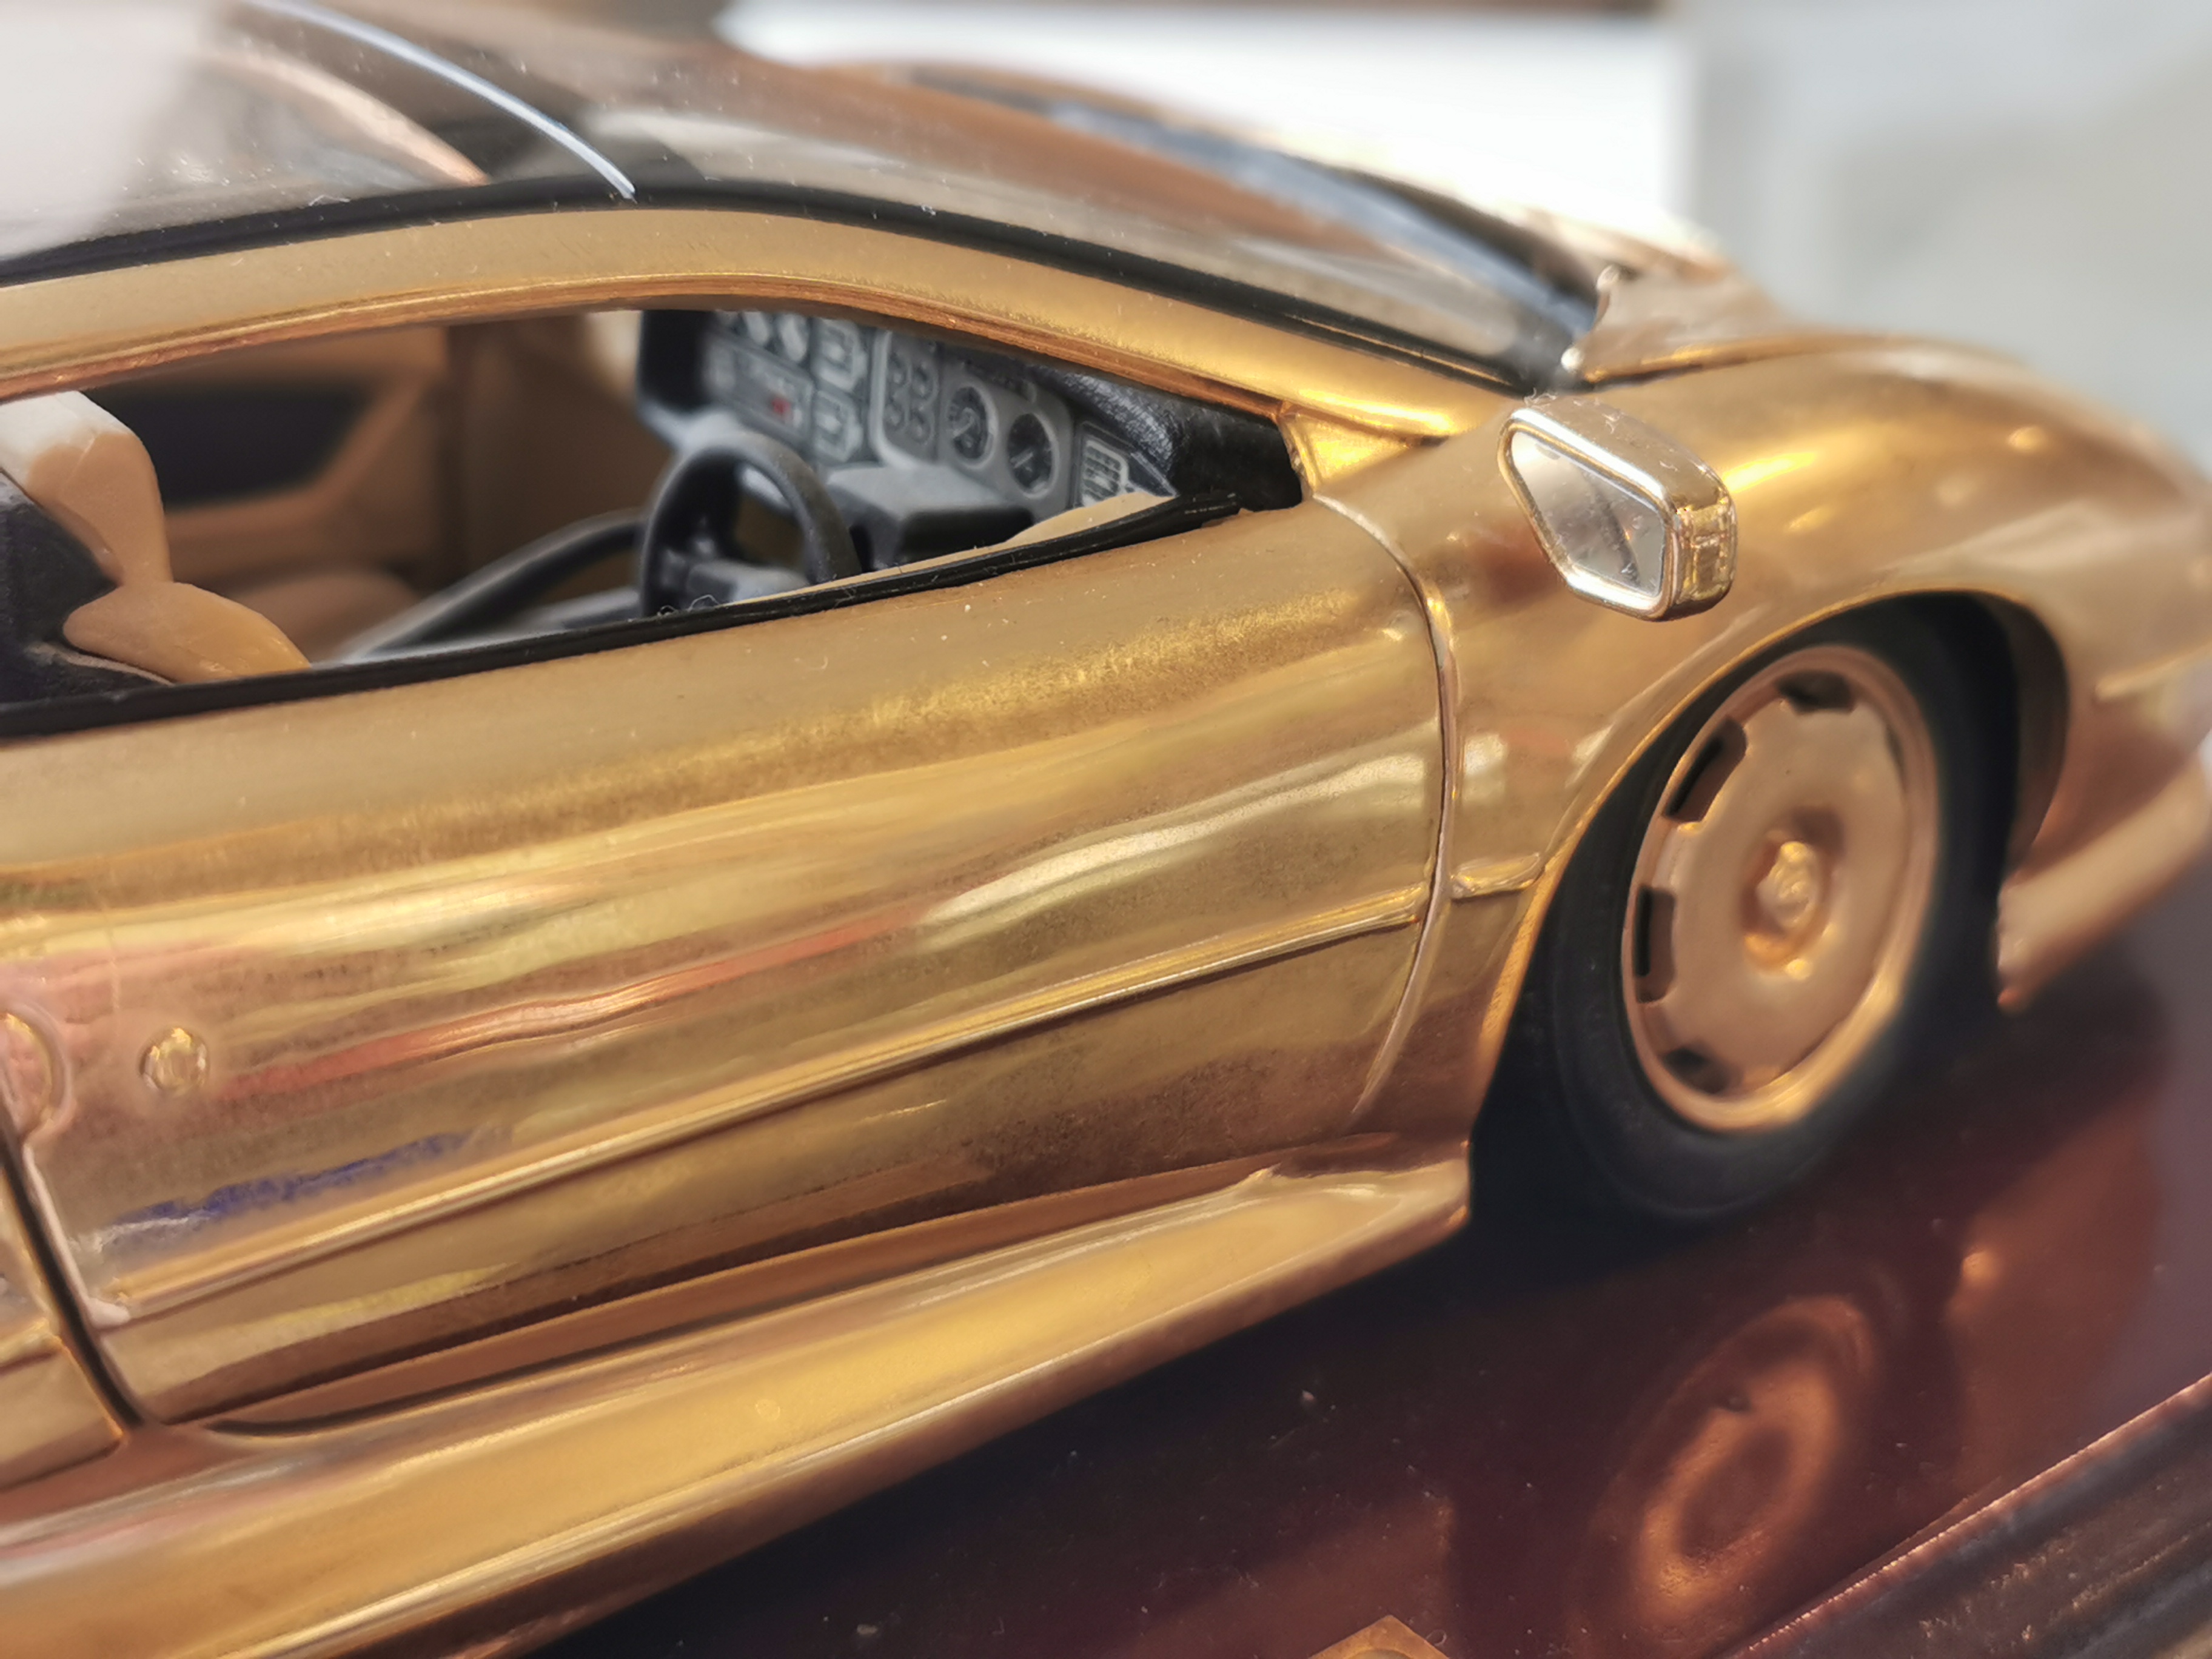 Jaguar XJ220 1:18 Scale Model Sports Car in 22ct Gold Plate - Image 3 of 5